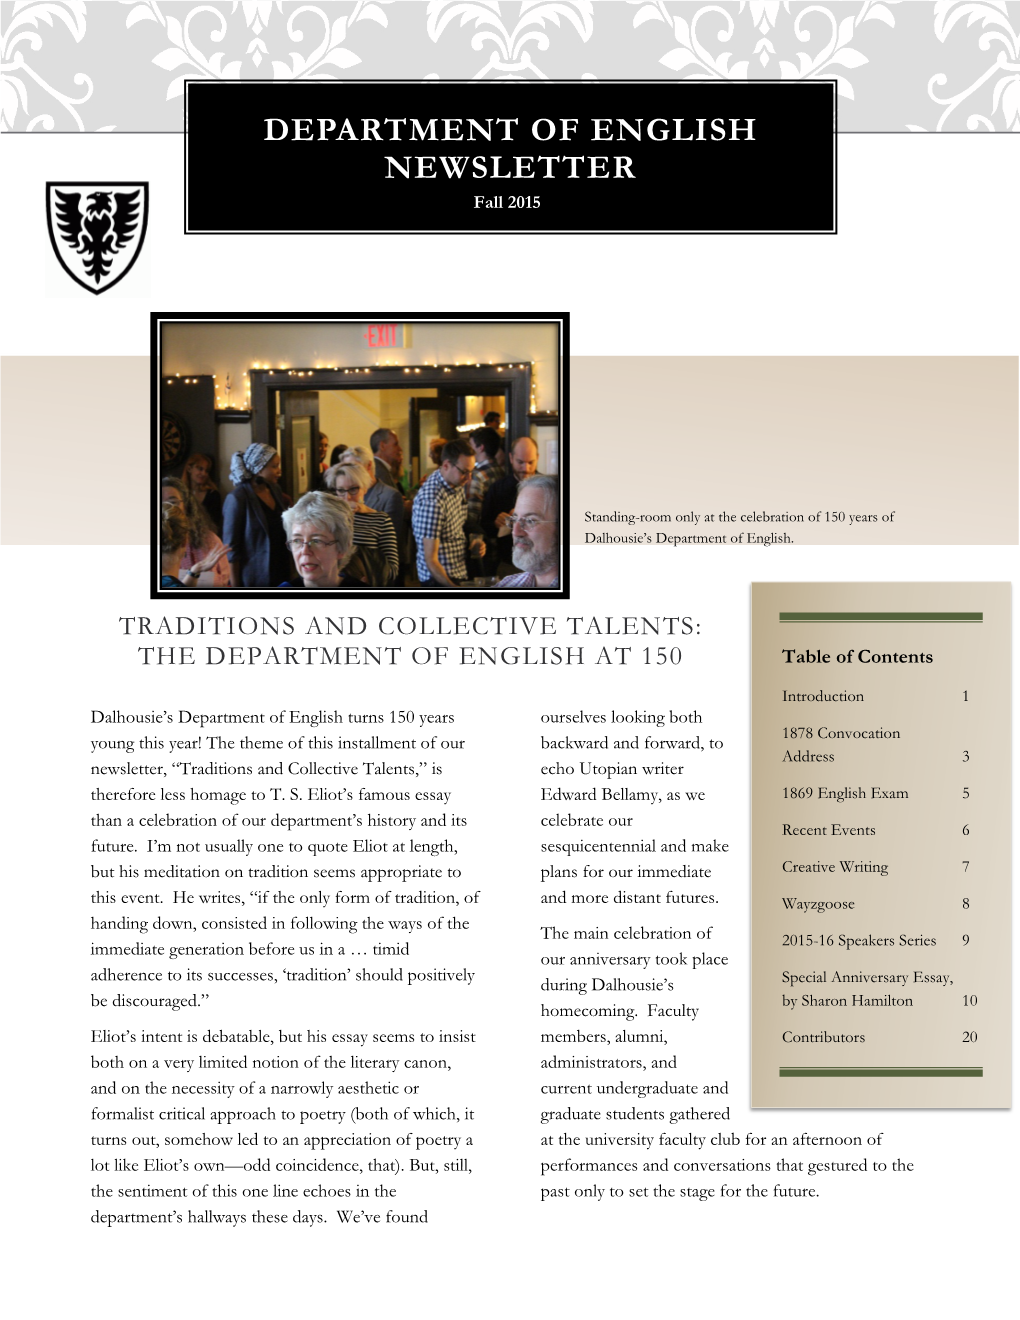 Department of English's Fall 2015 Newsletter